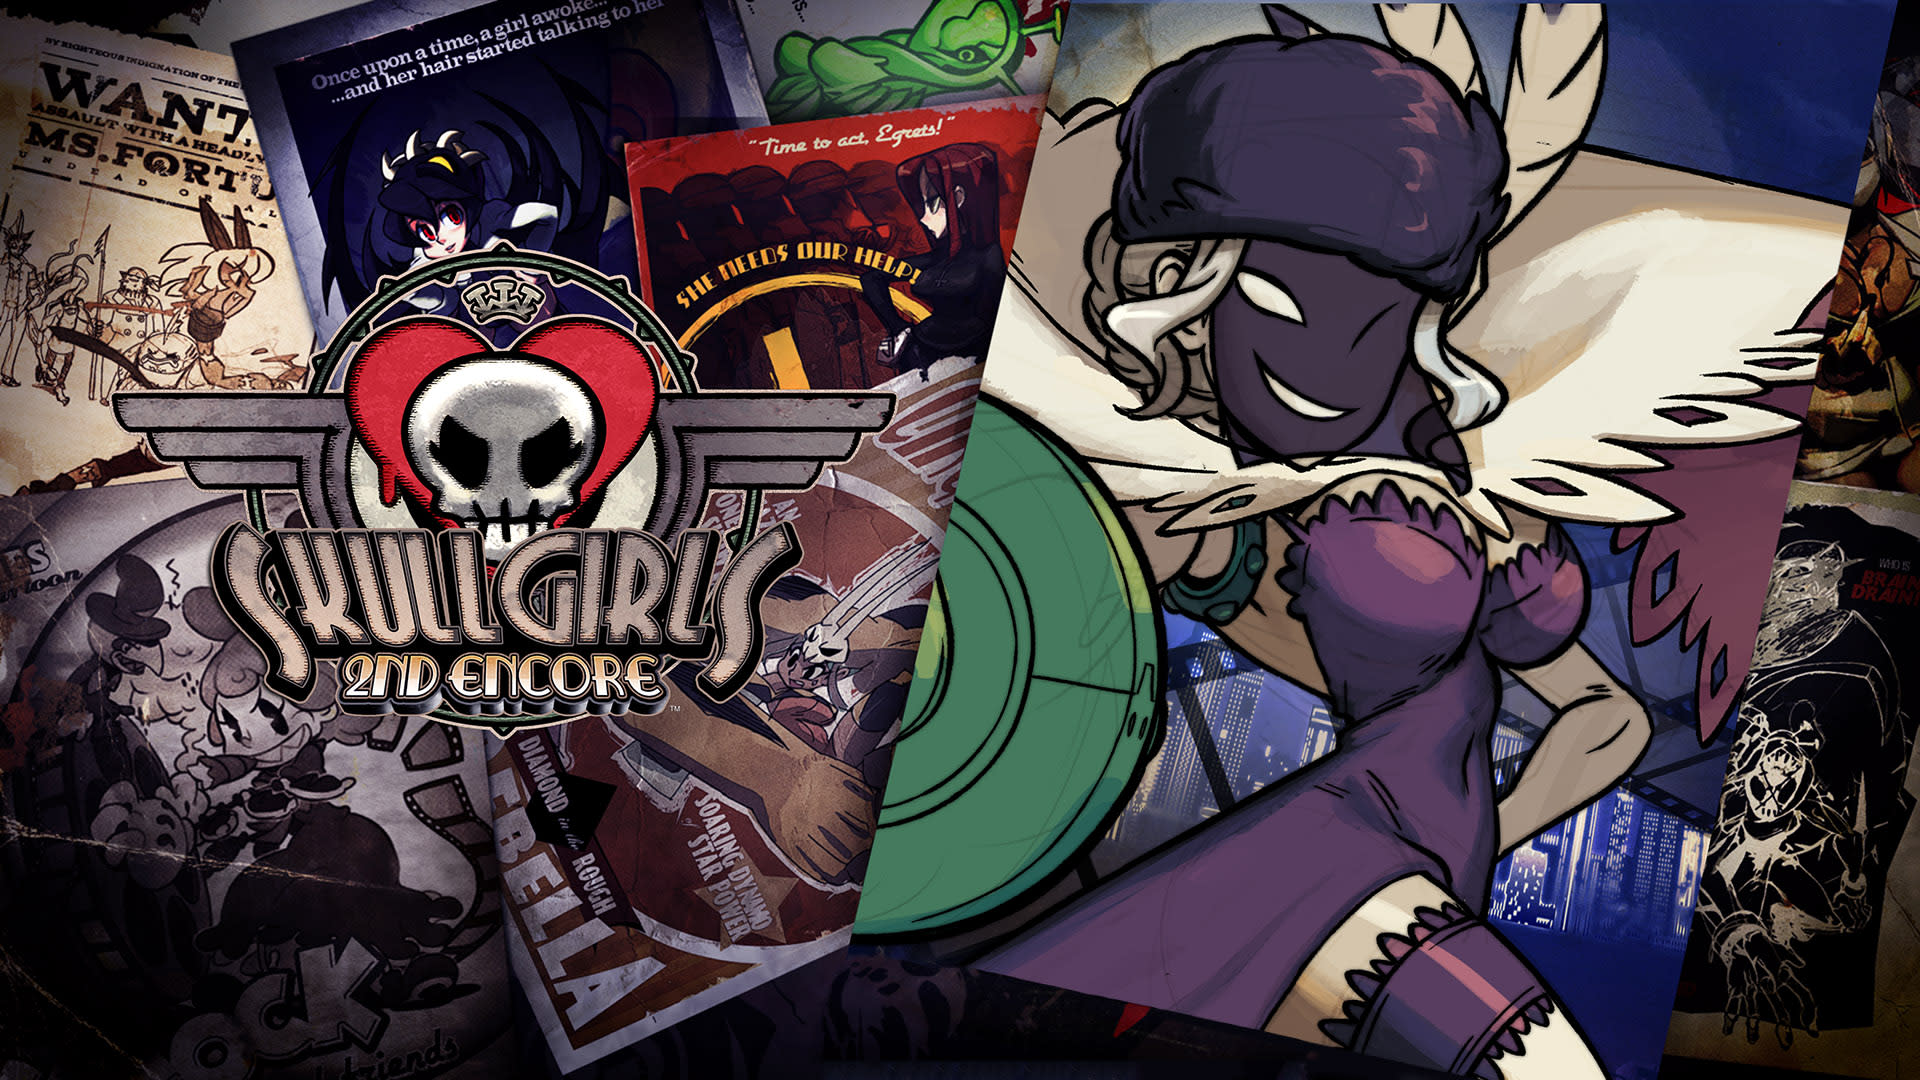 Skullgirls 2nd Encore for Nintendo Switch - Nintendo Official Site